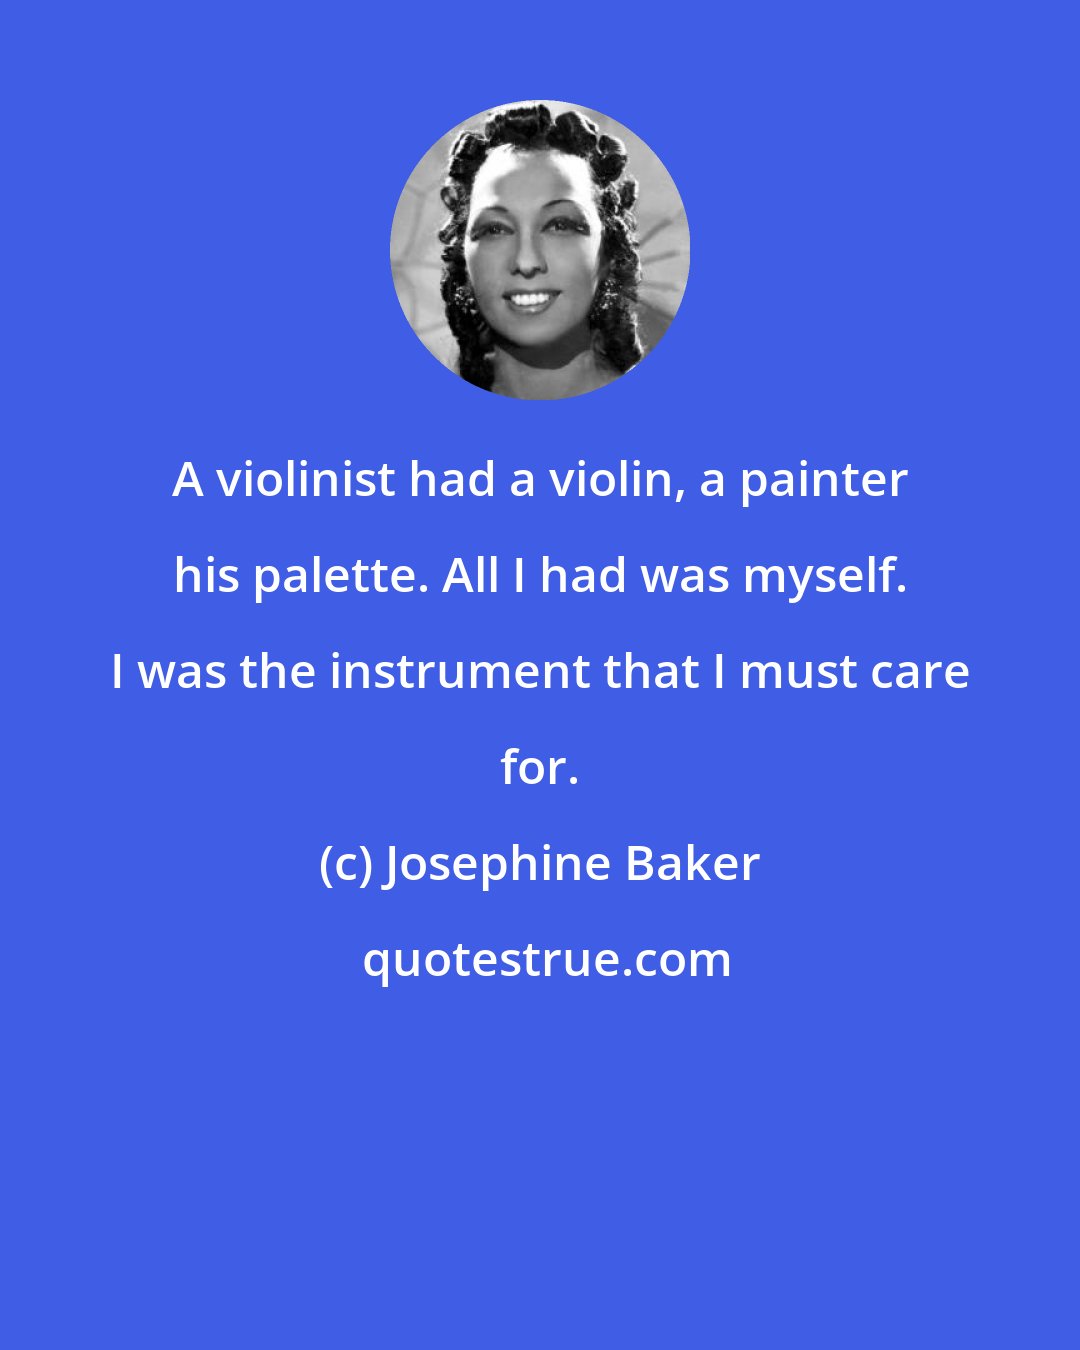 Josephine Baker: A violinist had a violin, a painter his palette. All I had was myself. I was the instrument that I must care for.